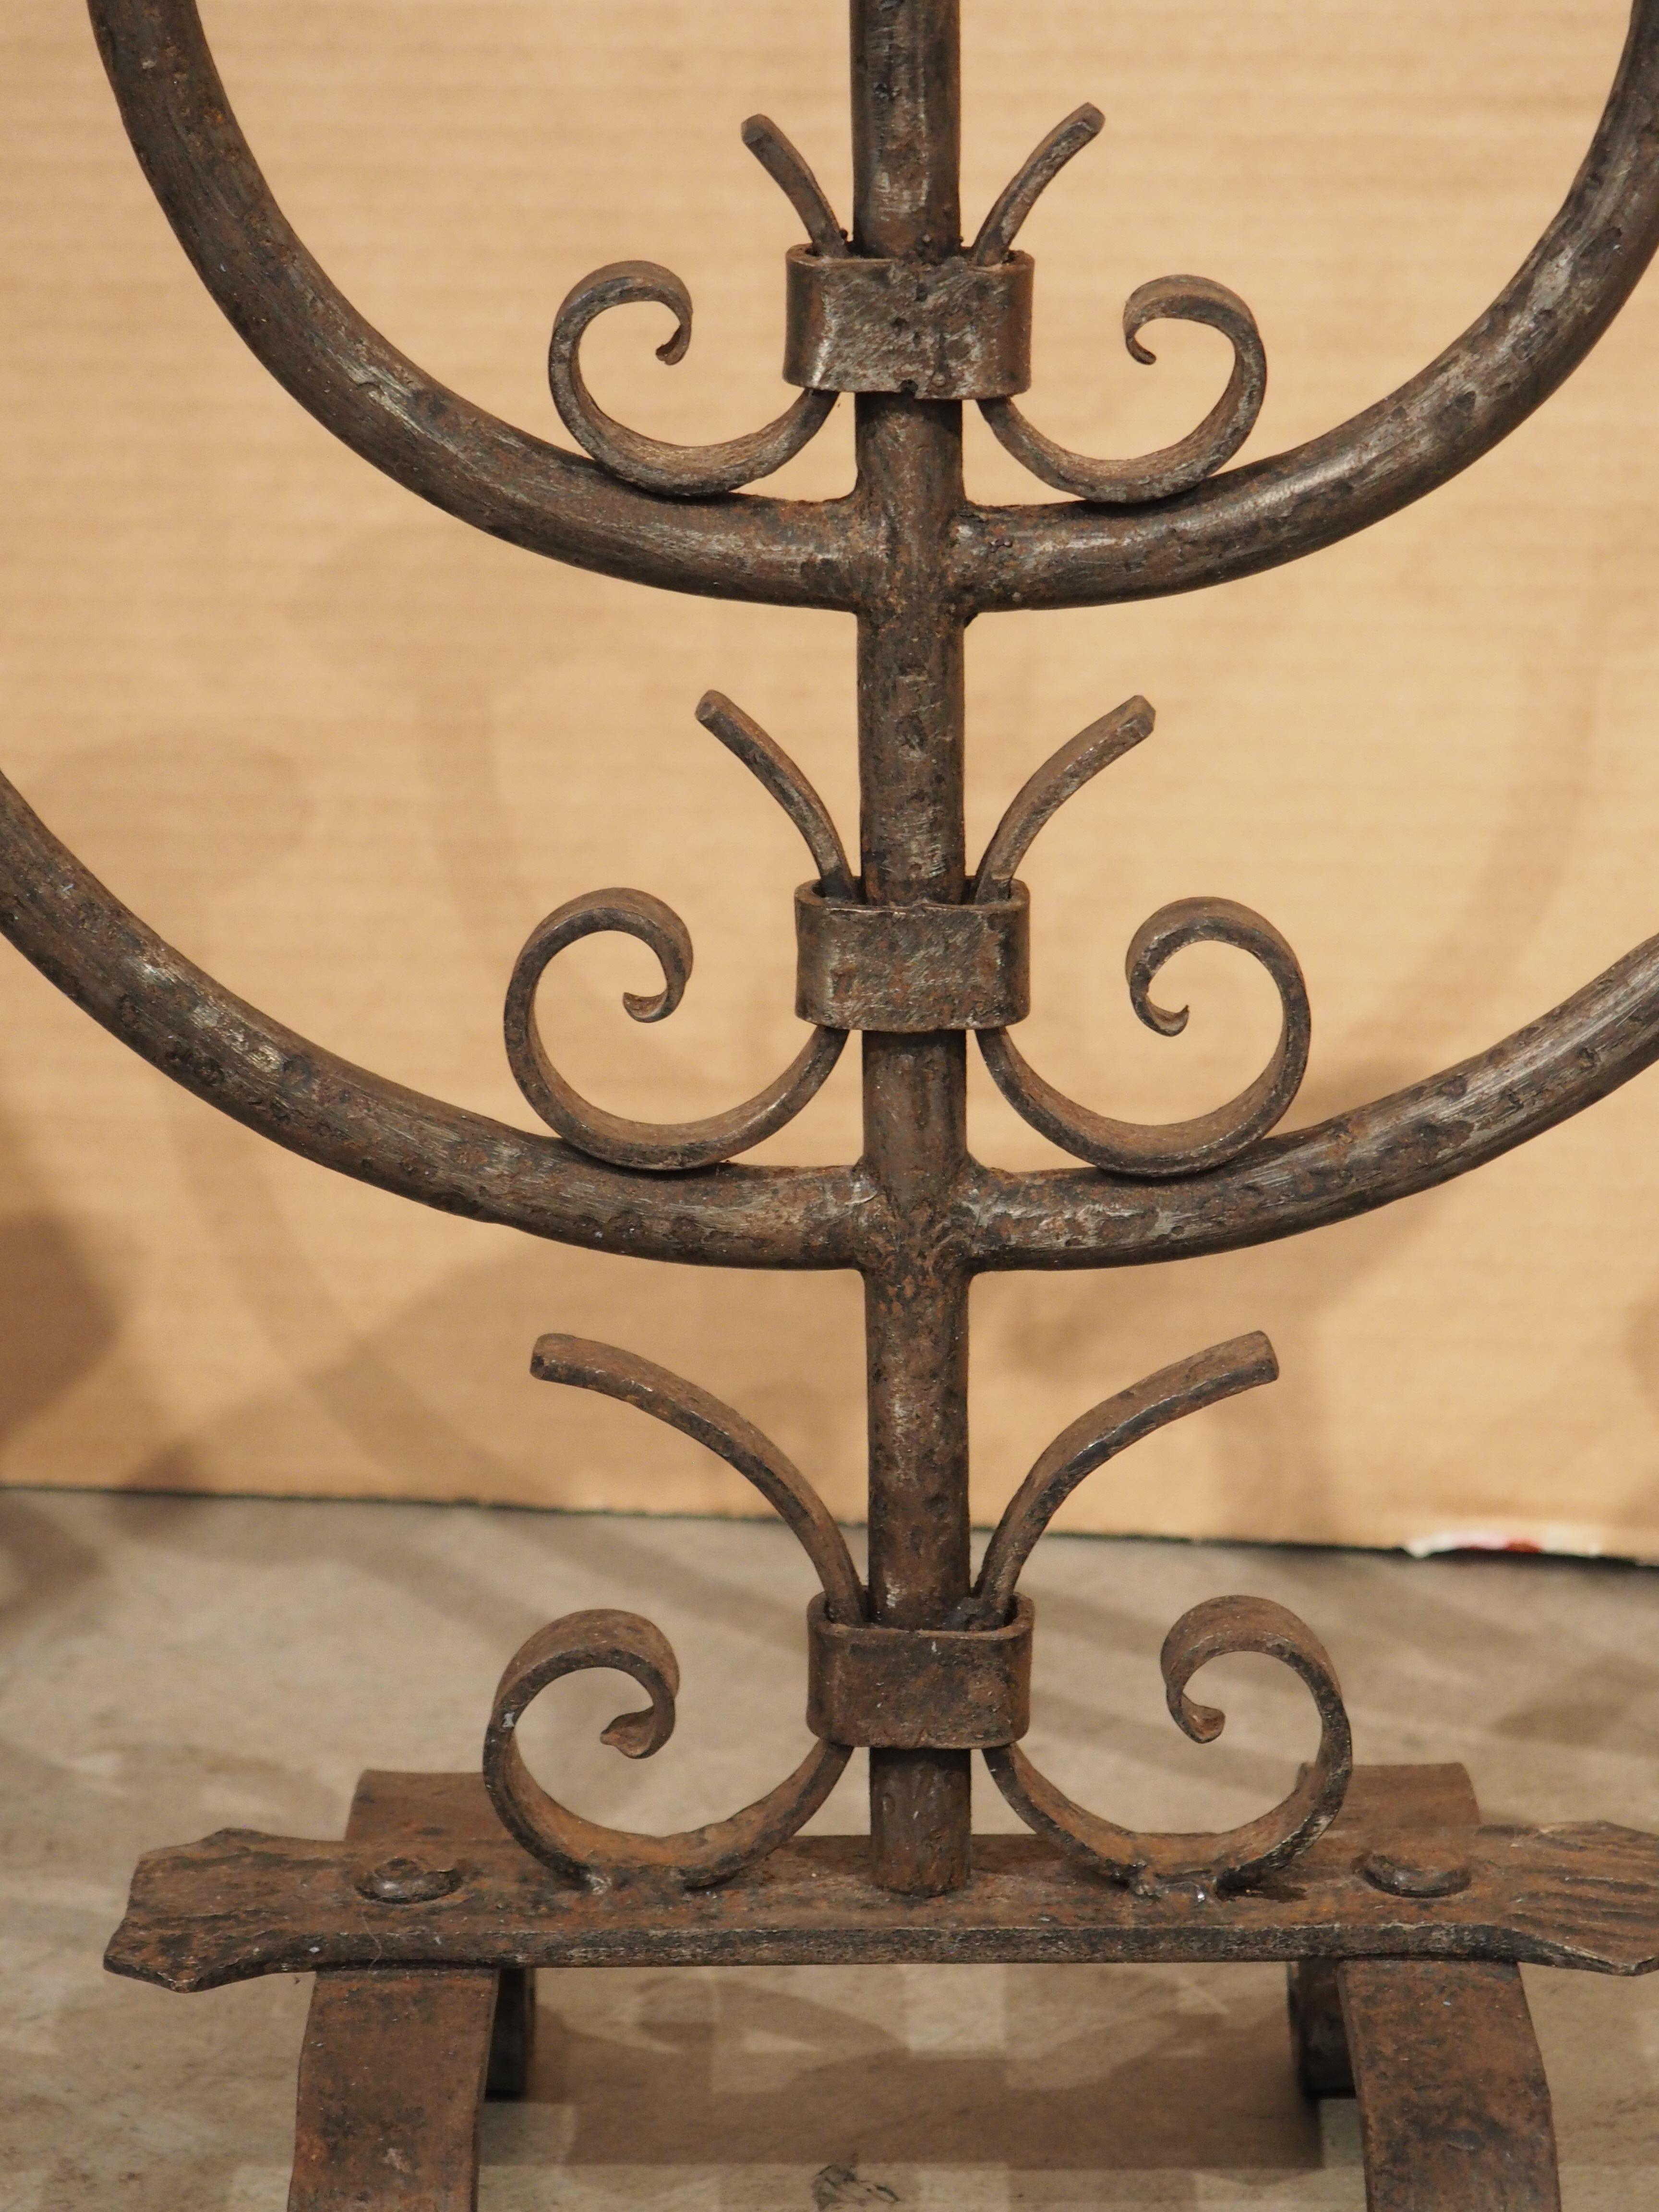 Early 20th Century Pair of Antique Wrought Iron Candelabras from Bordeaux, France C. 1900